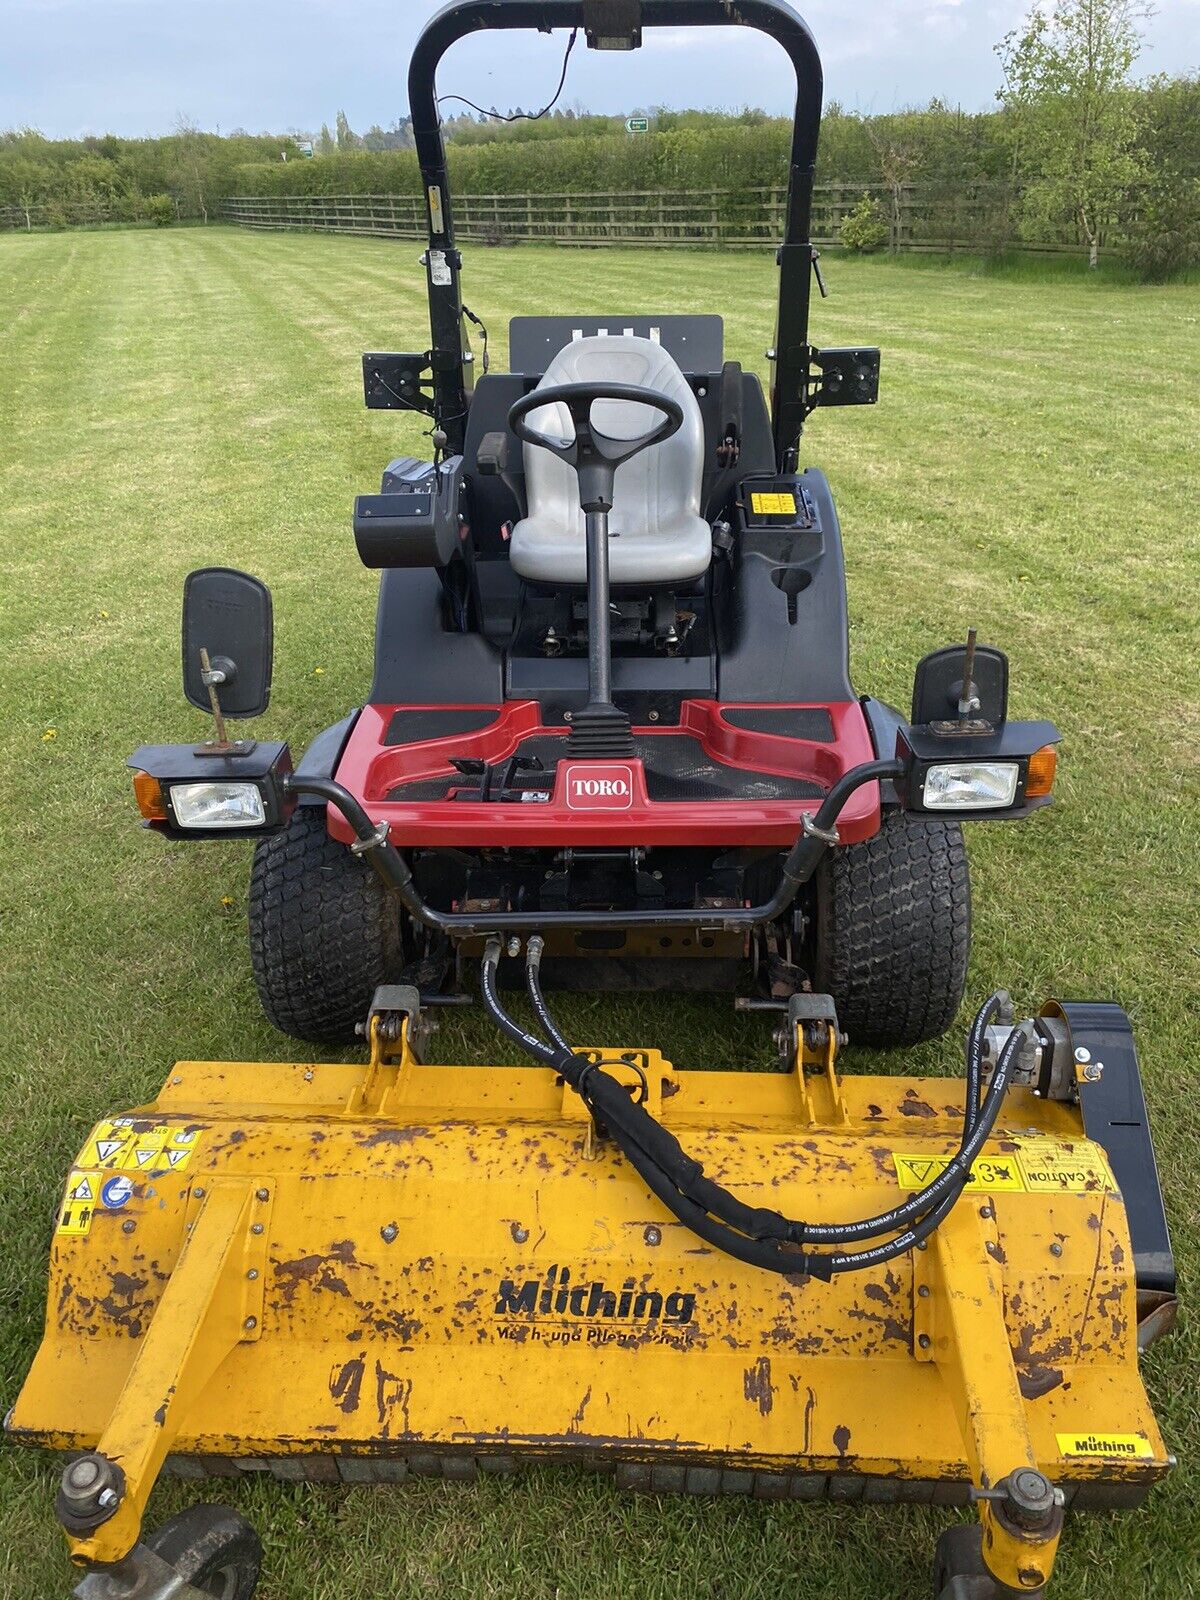 2016 TORO GROUNDMASTER 3400 OUTFRONT RIDE SIT ON MOWER FITTEDWITH MUTHING FLAIL 3